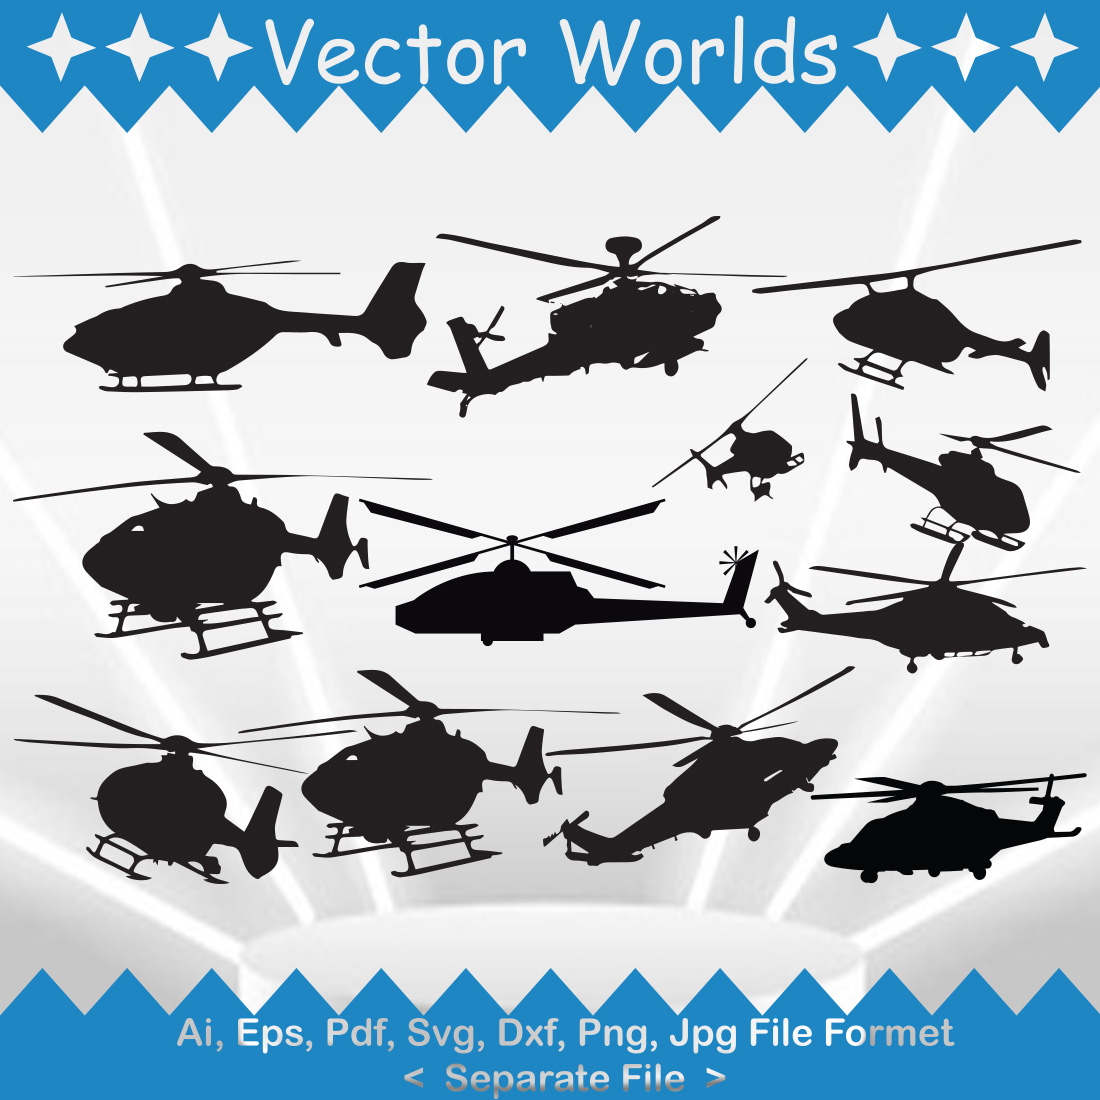 Helicopter SVG Vector Design cover image.